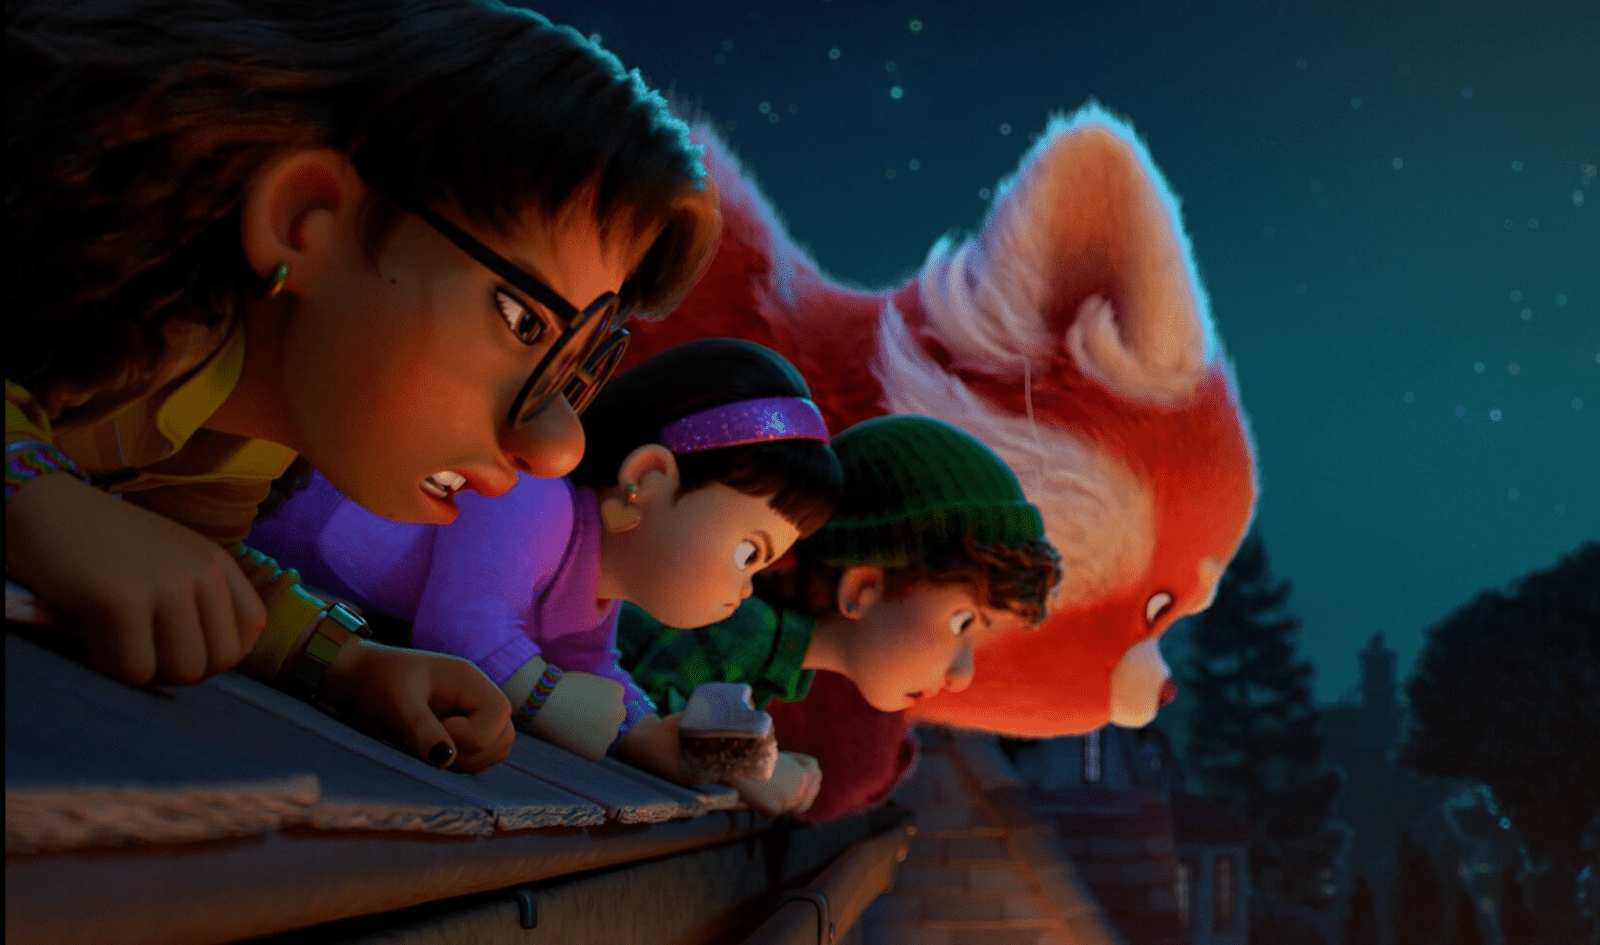 A giant red panda and her three friends peering down from a rooftop at night